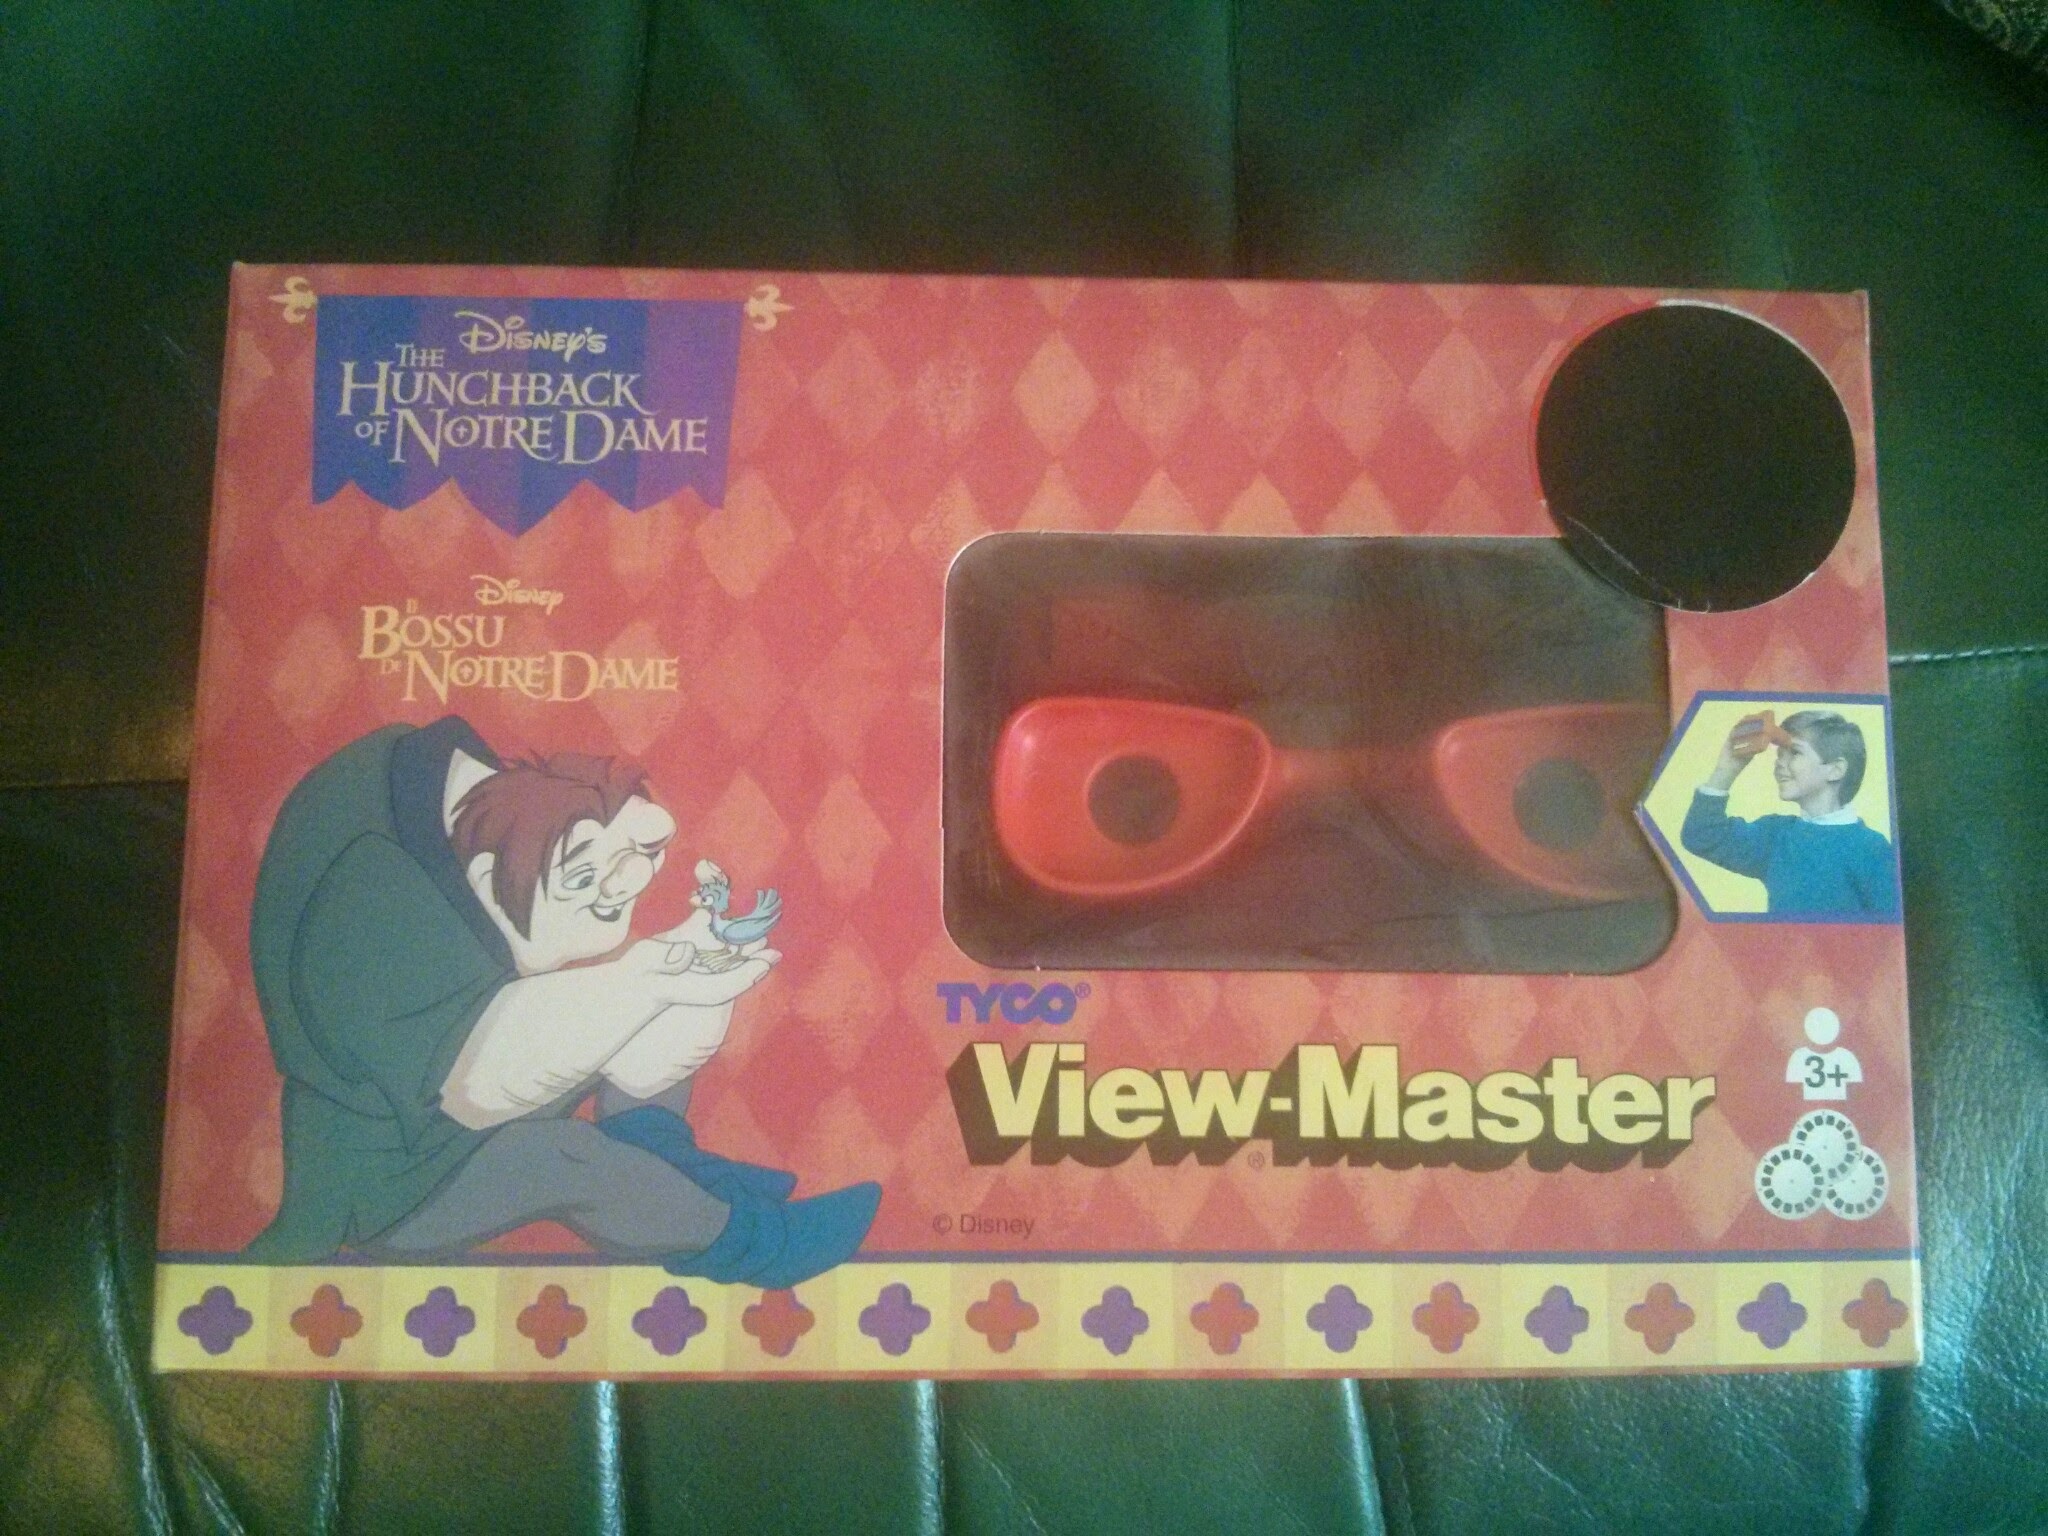 https://lewismcgeary.github.io/images/viewmaster/viewmaster-box-front.jpg